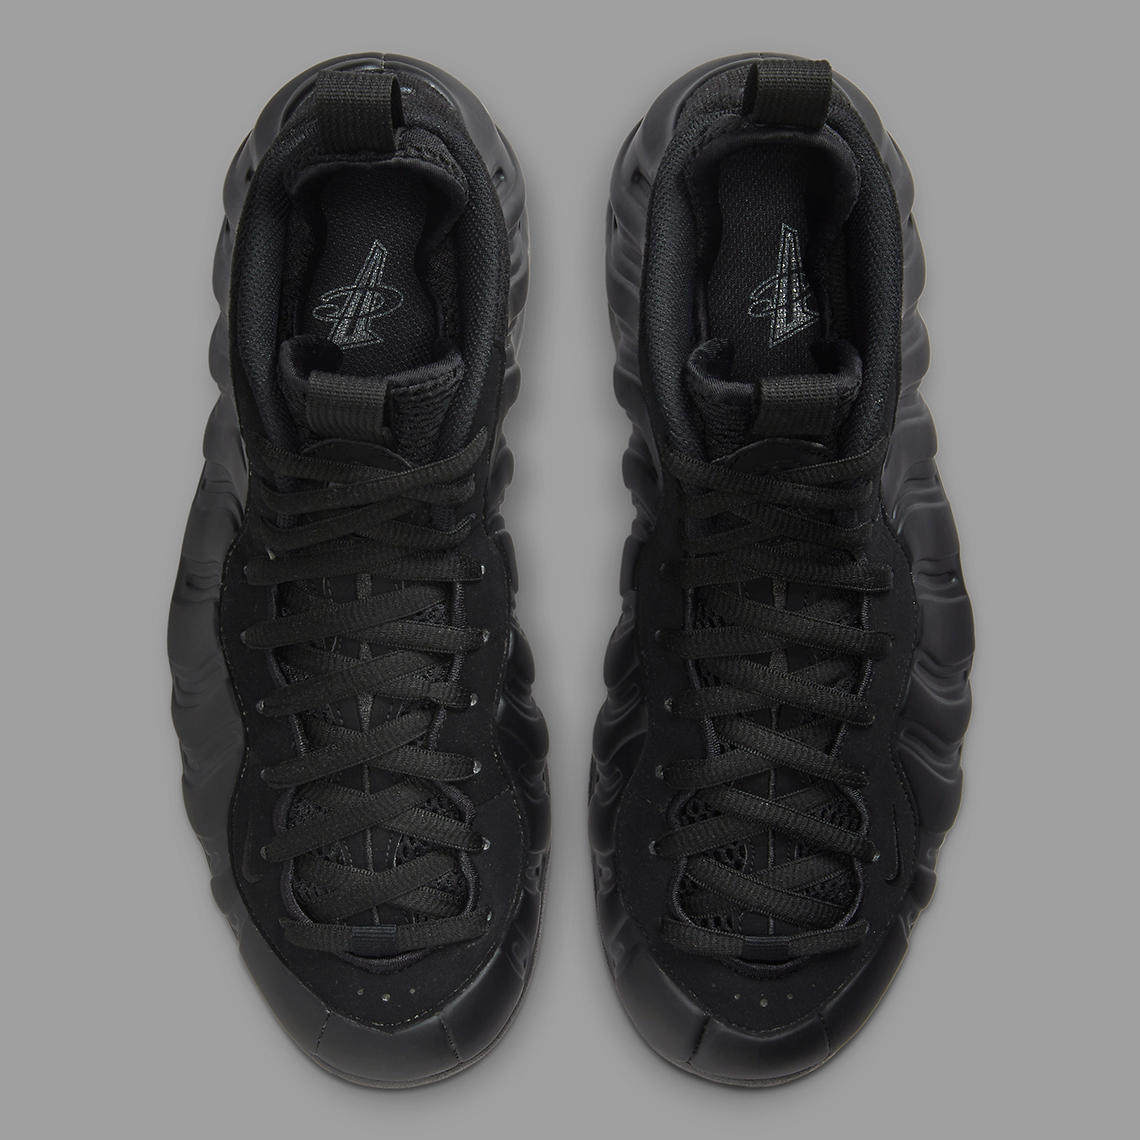 Nike year Air Foamposite Anthracite FD5855 001 1